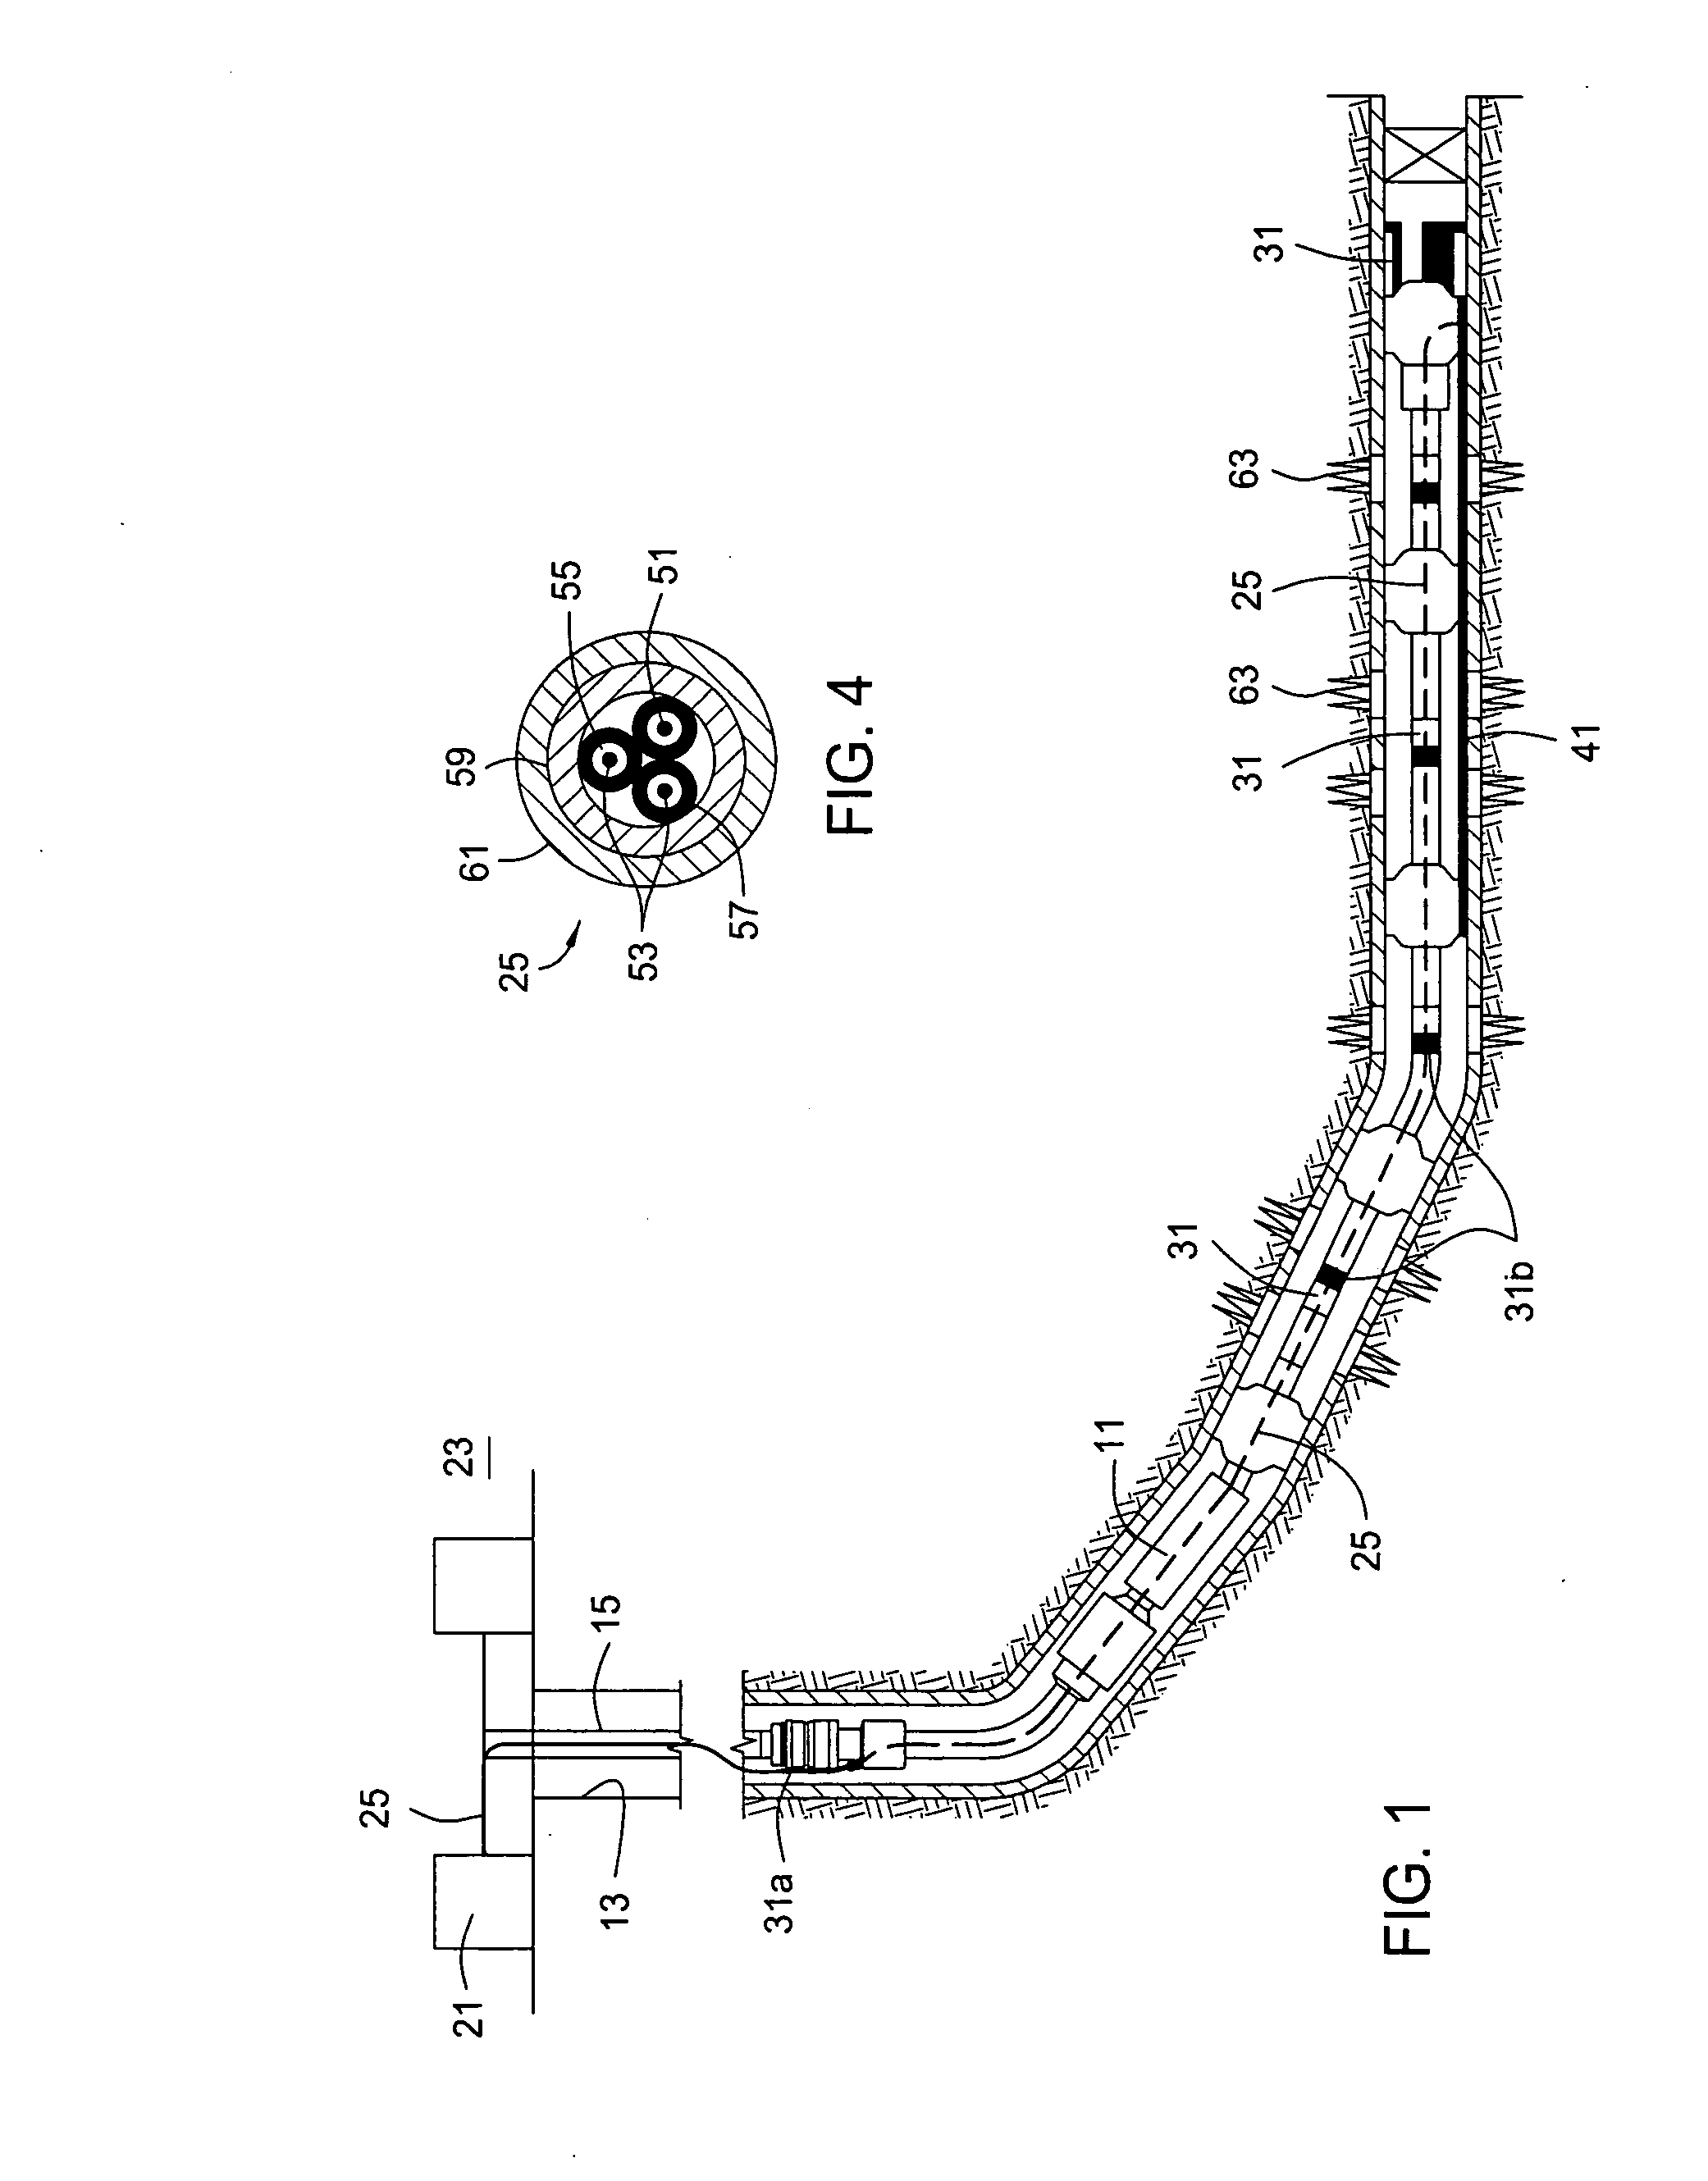 System, method, and apparatus for downhole submersible pump having fiber optic communications